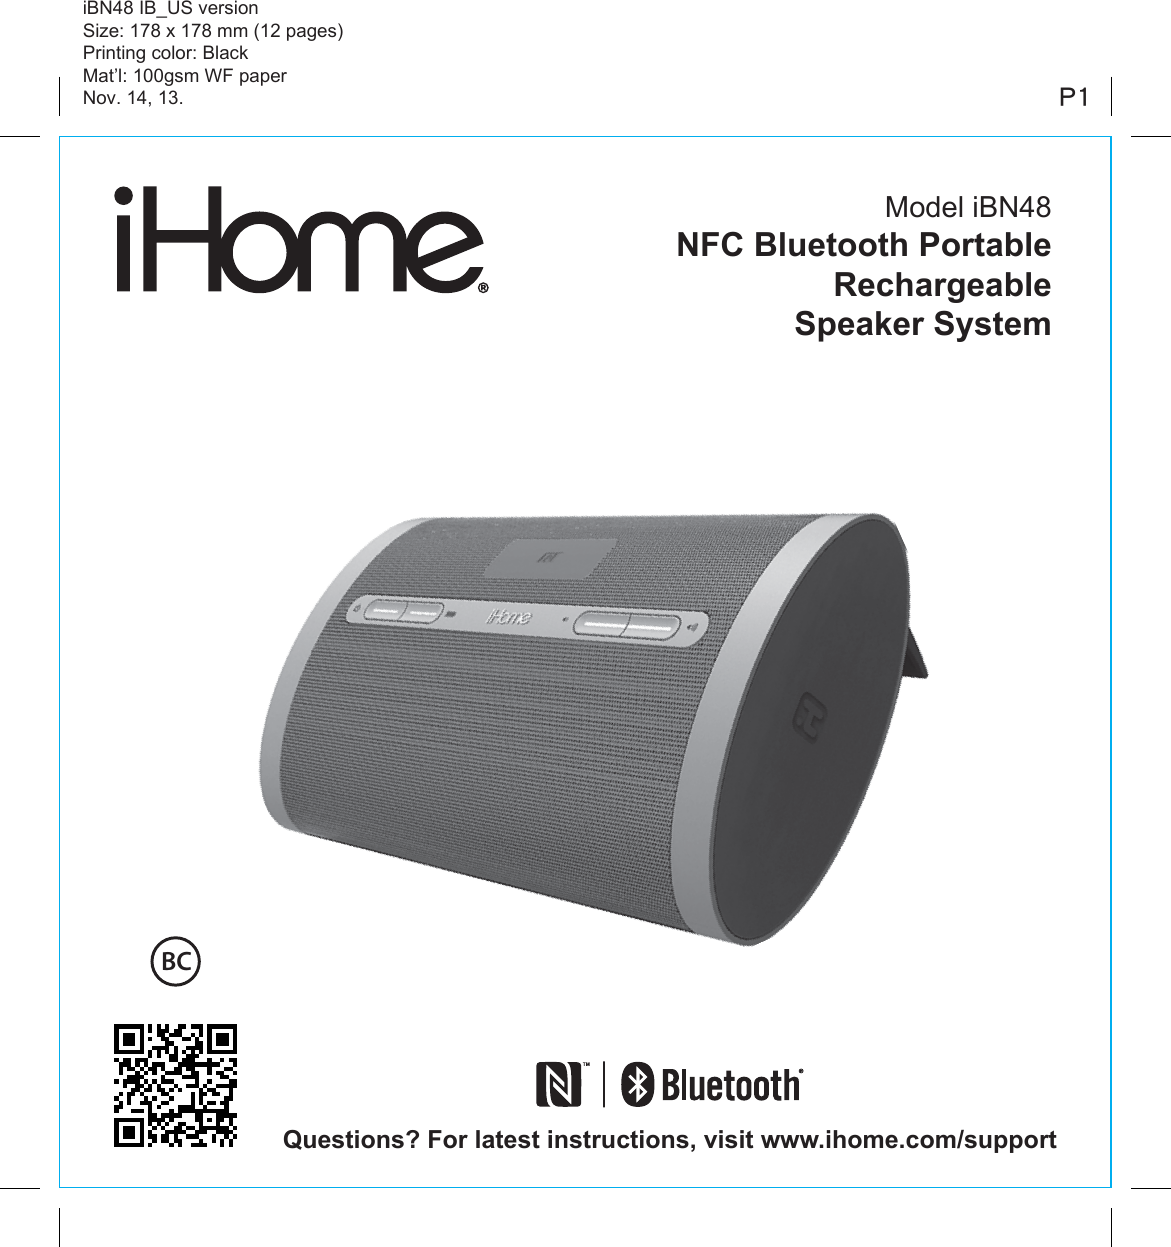 Model iBN48NFC Bluetooth Portable RechargeableSpeaker System iBN48 IB_US versionSize: 178 x 178 mm (12 pages)Printing color: BlackMat’l: 100gsm WF paperNov. 14, 13. P1Questions? For latest instructions, visit www.ihome.com/supportBC